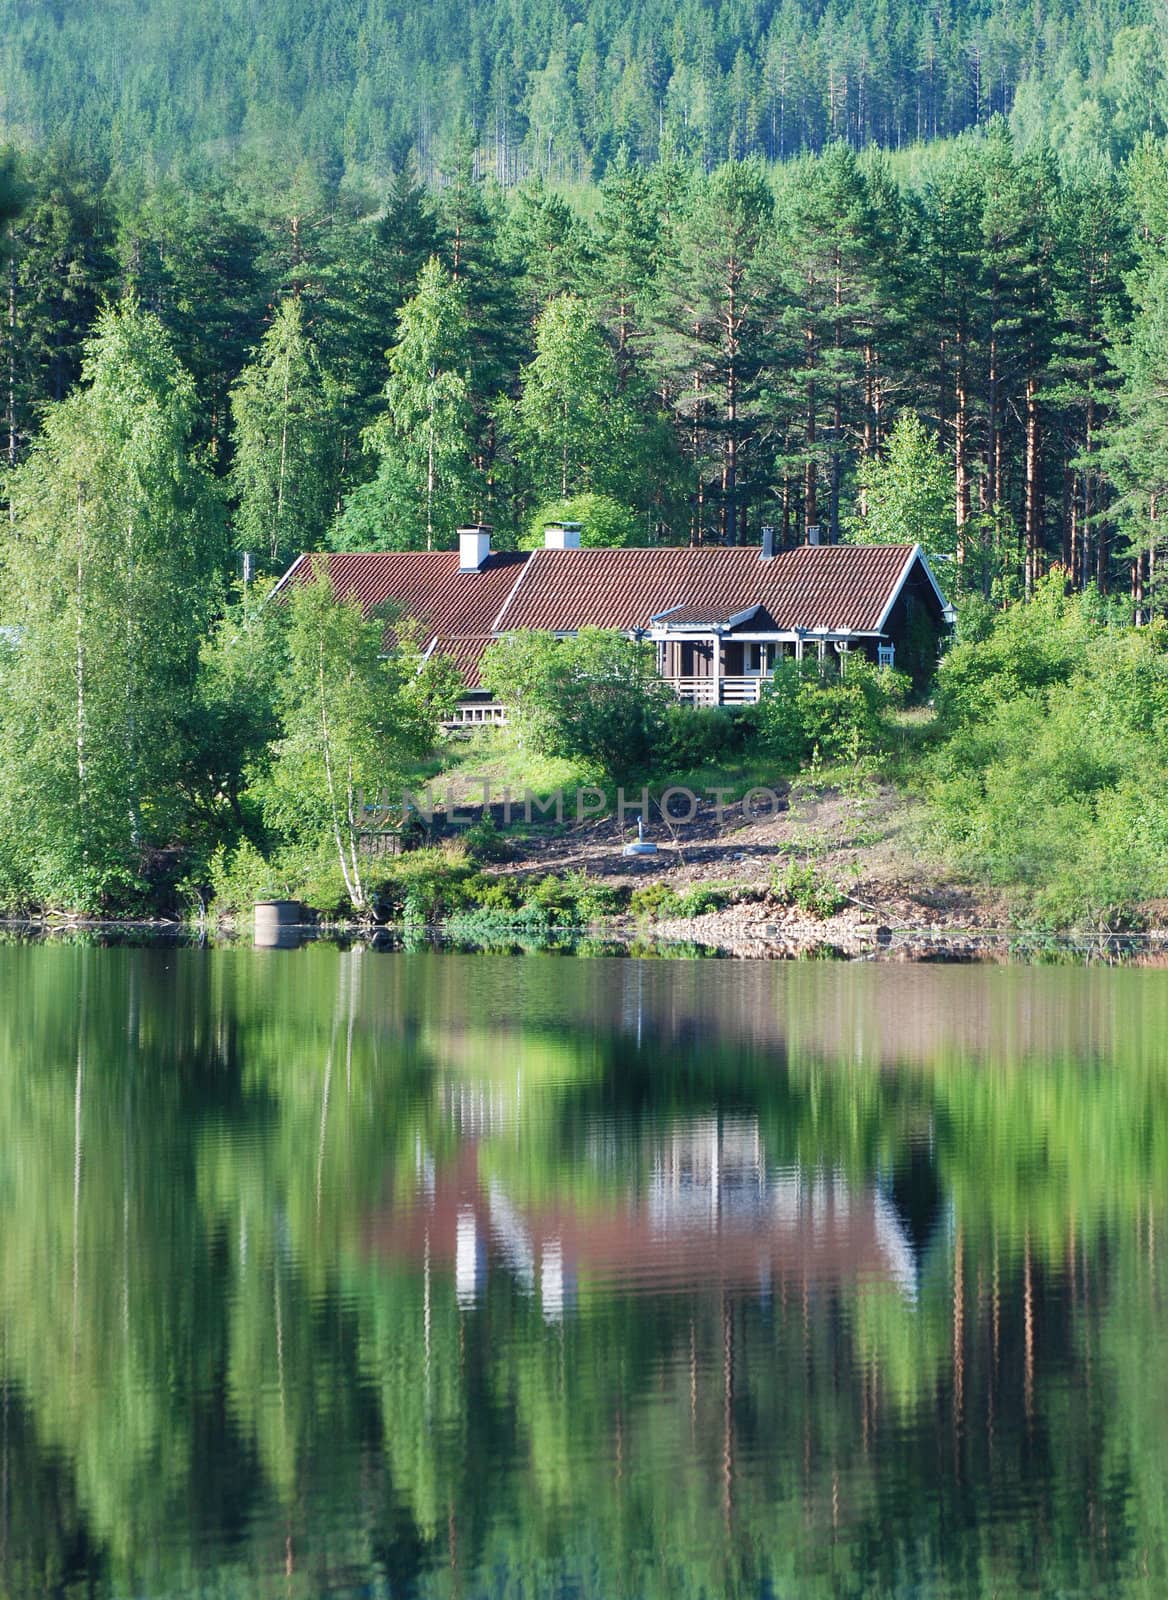 Holiday Homes in the wilderness